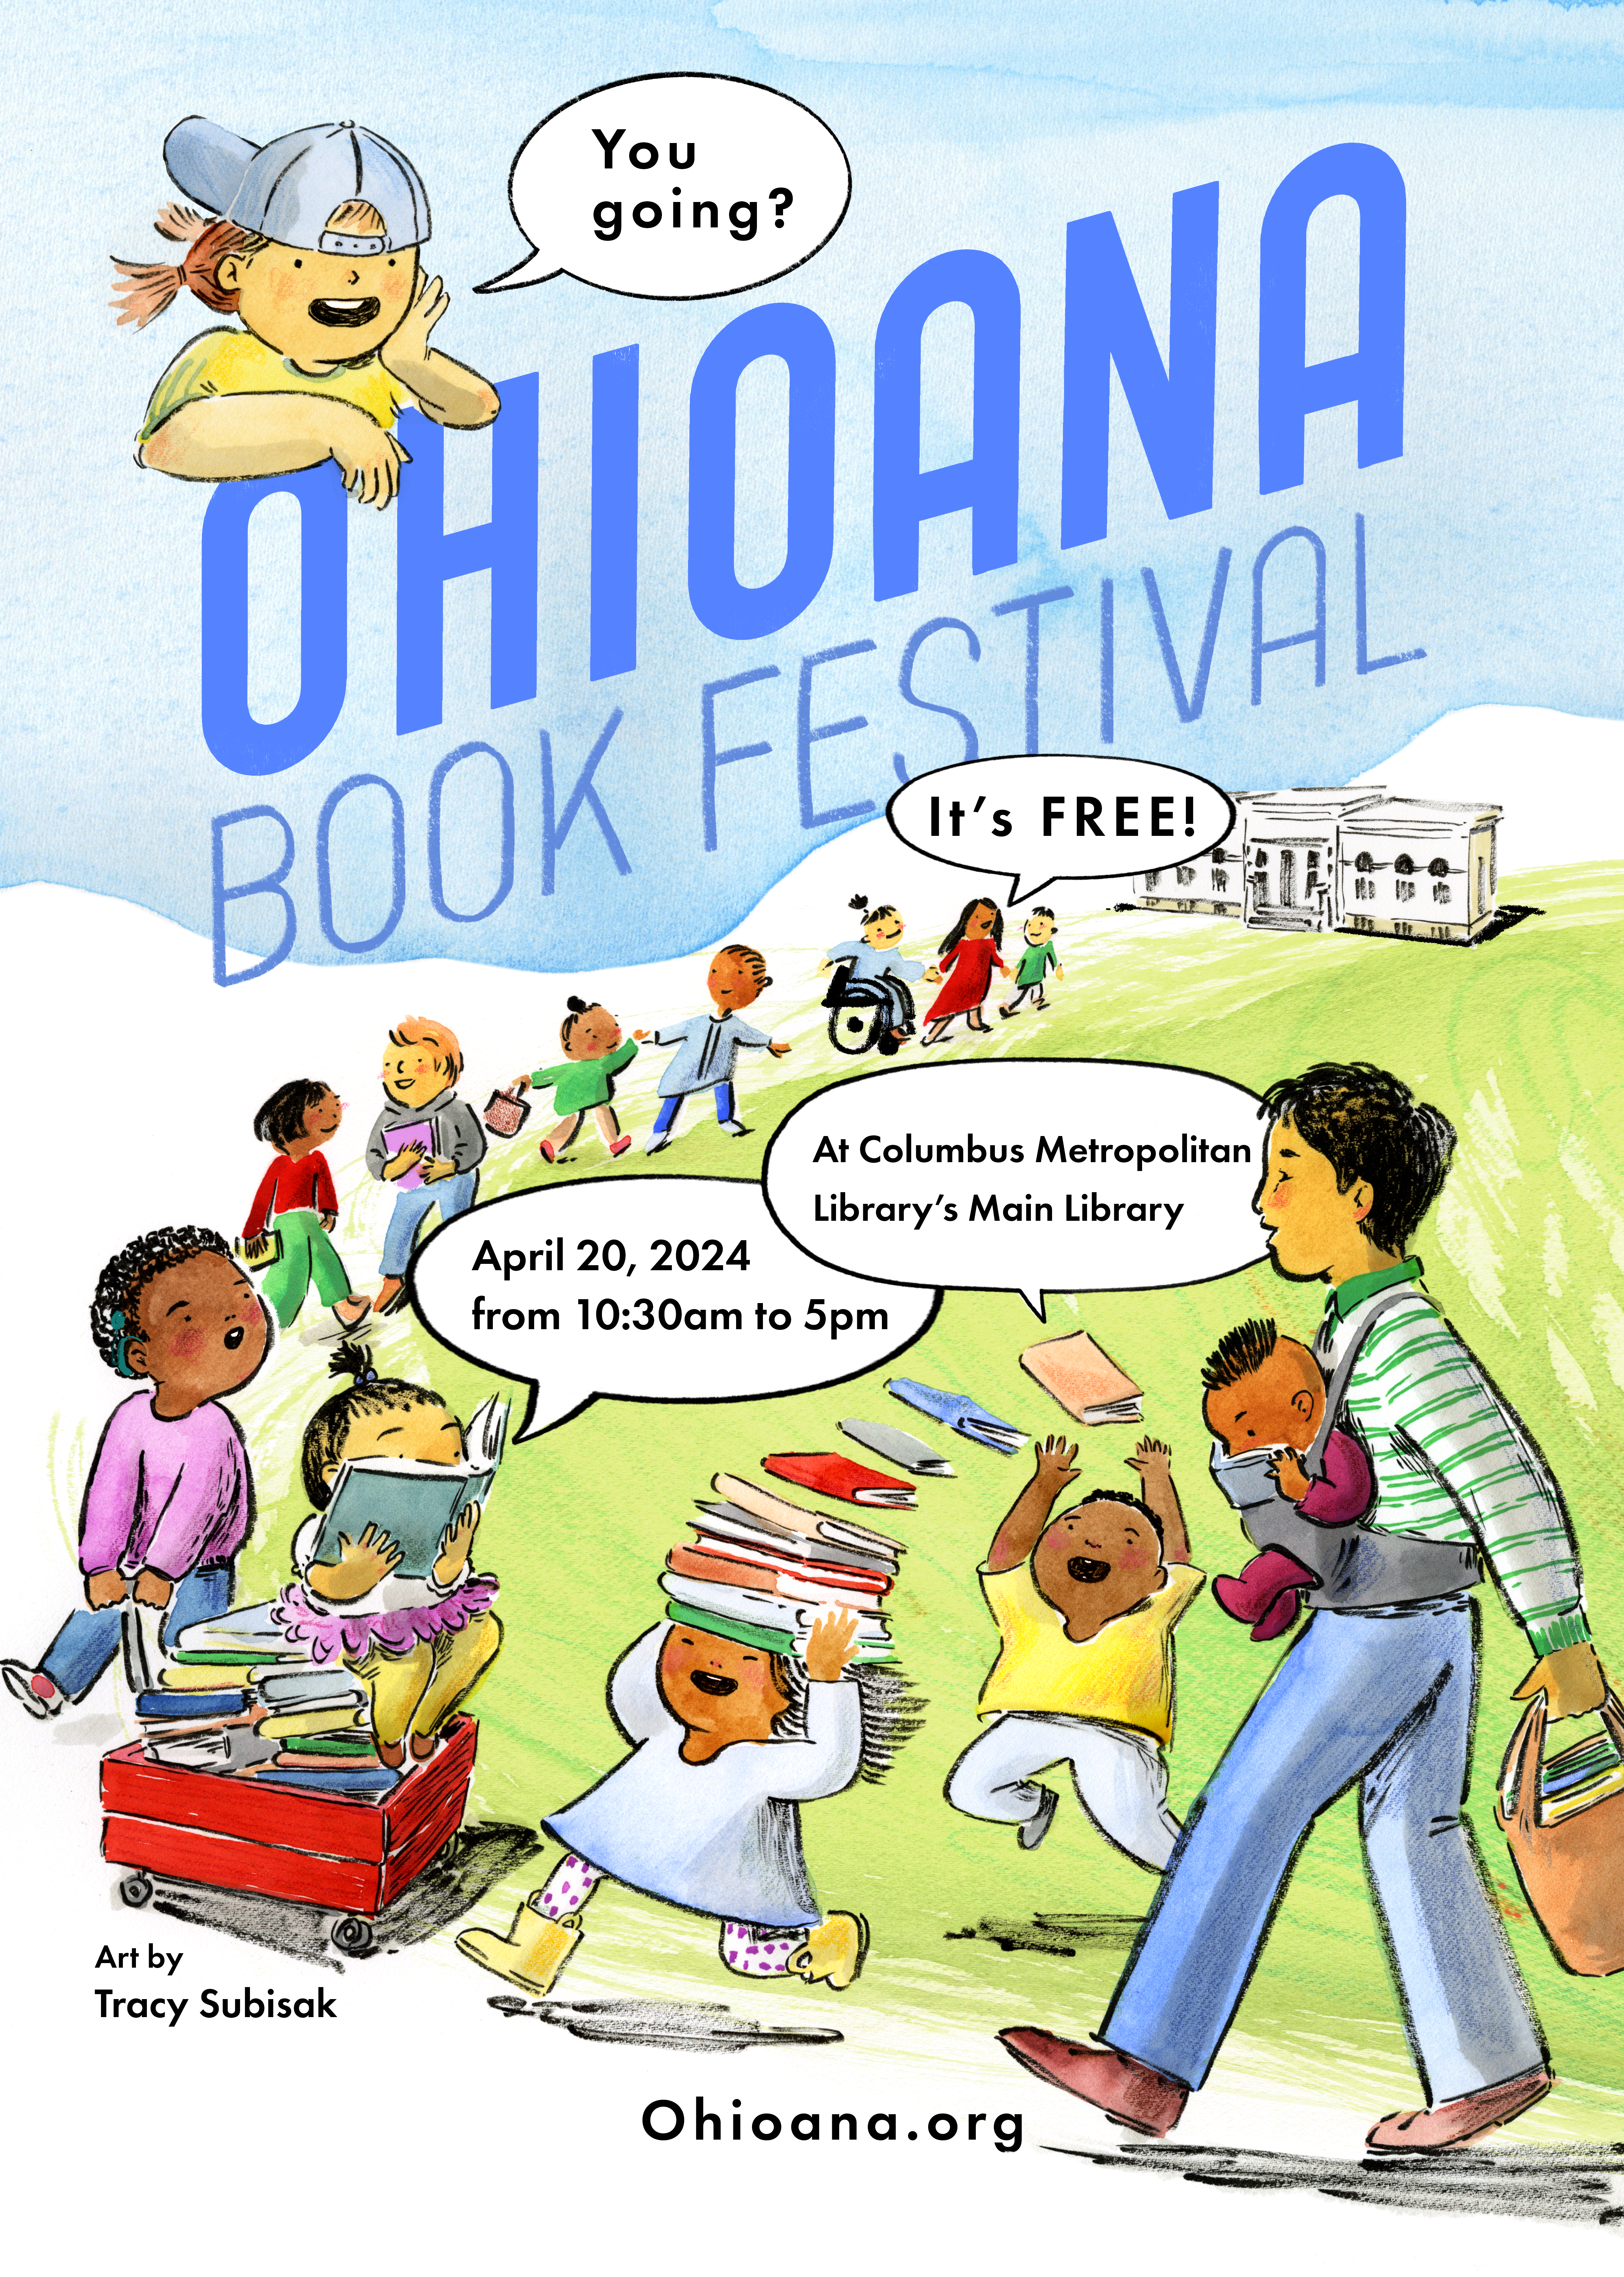 The 2024 Ohioana Book Festival poster created by Tracy Subisak features and illustration of many people on their way to the Ohioana Book Festival at Columbus Metropolitan Library's Main Library. The children are holding stacks of book and look extremely excited to attend the festival!